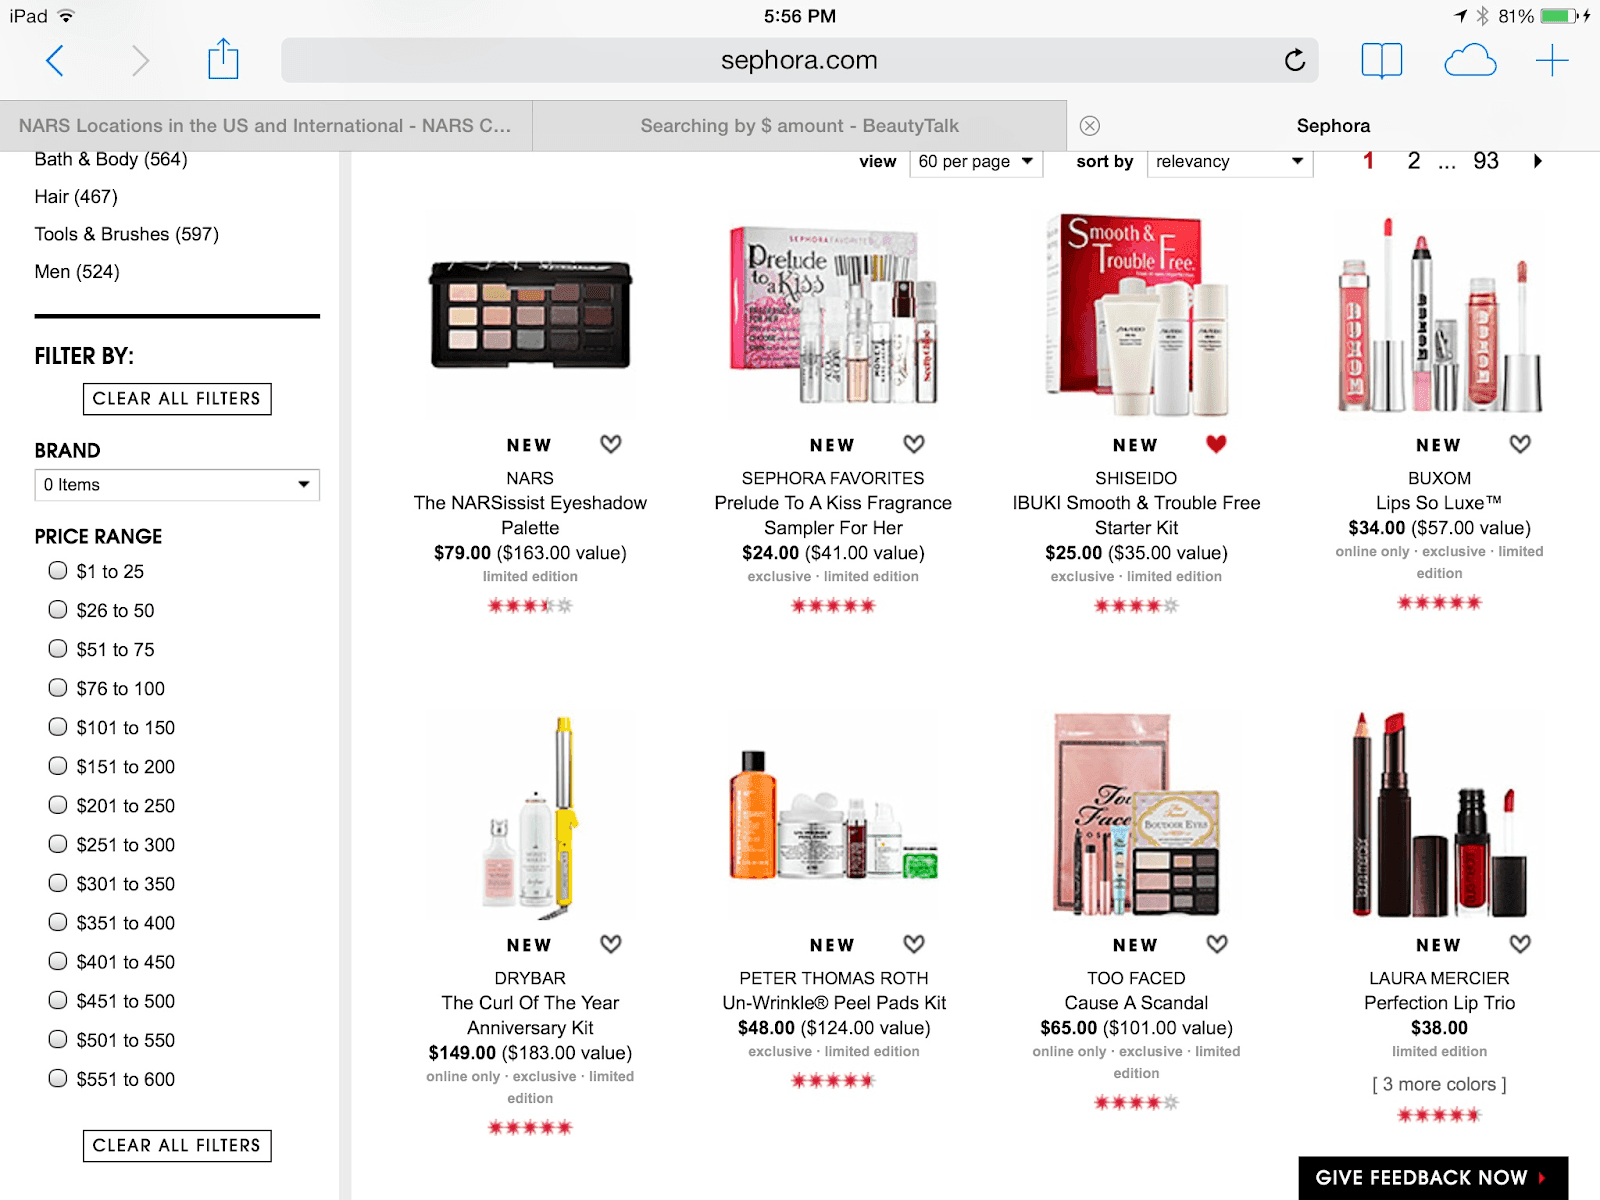 Sephora product prices on their website 